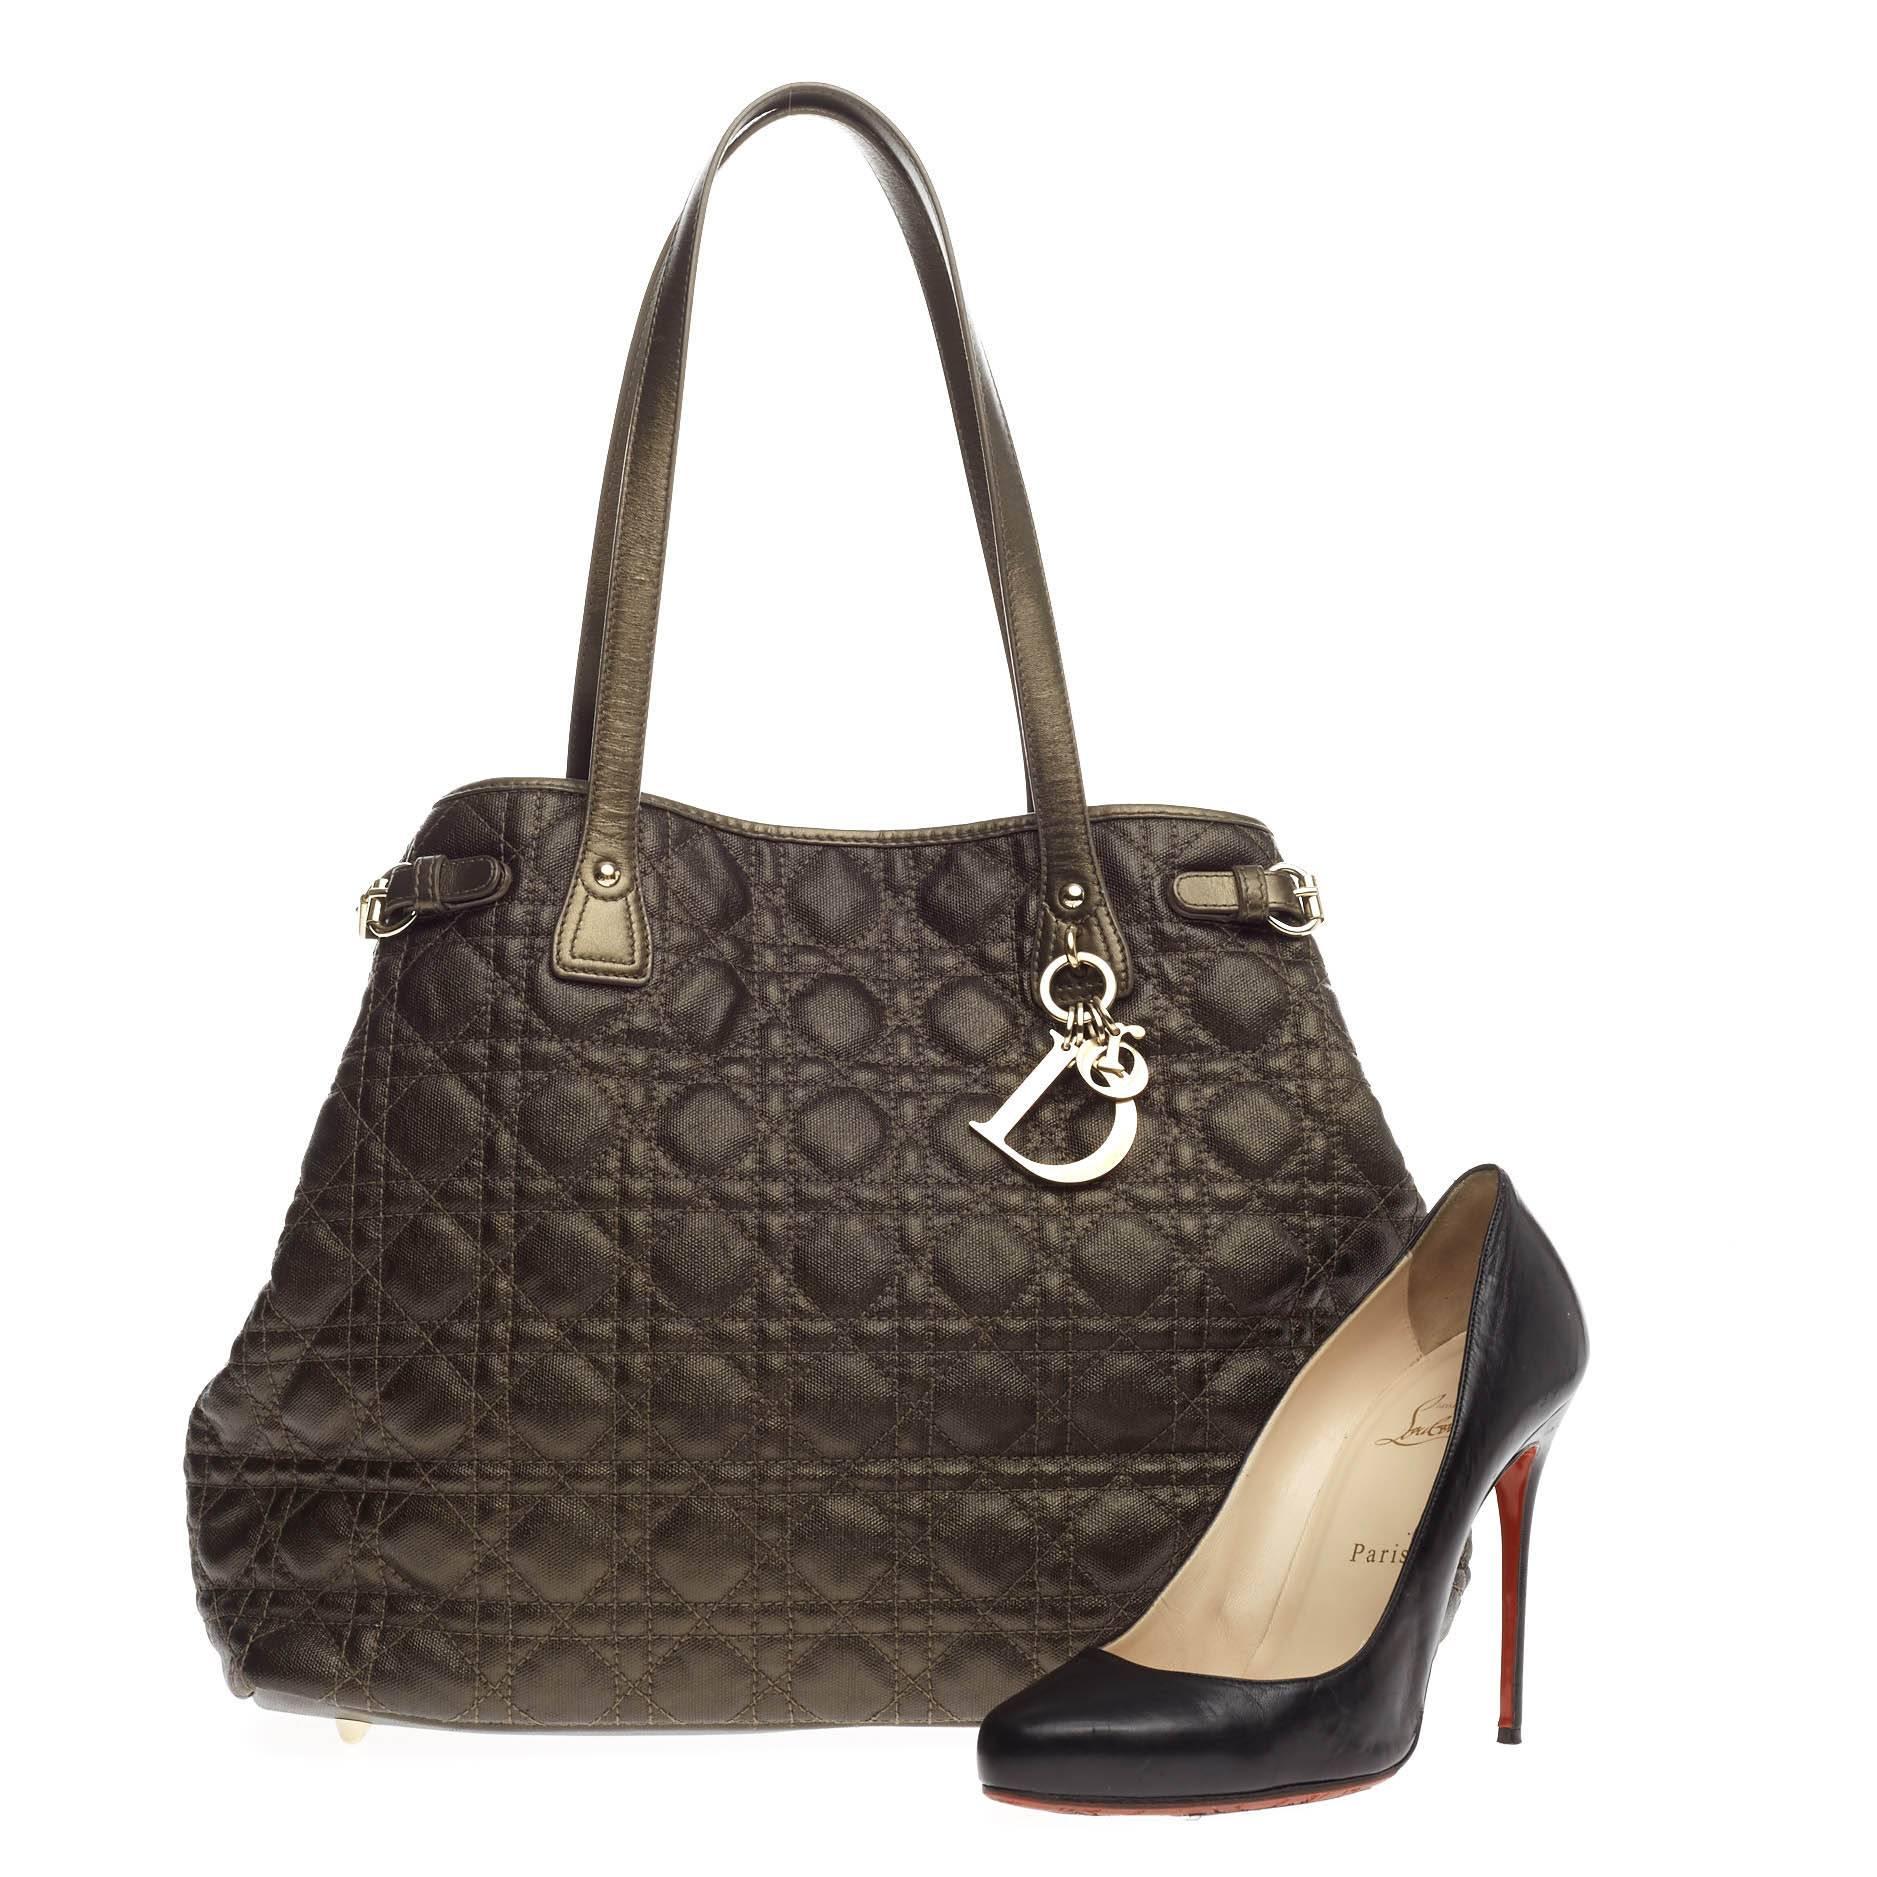 This authentic Christian Dior Panarea Tote Cannage Quilt Canvas Medium is a classic for every fashionista. Crafted in bronze quilted canvas, this chic tote features Dior's signature cannage quilting, slim dual-flat handles, gold charms, belt